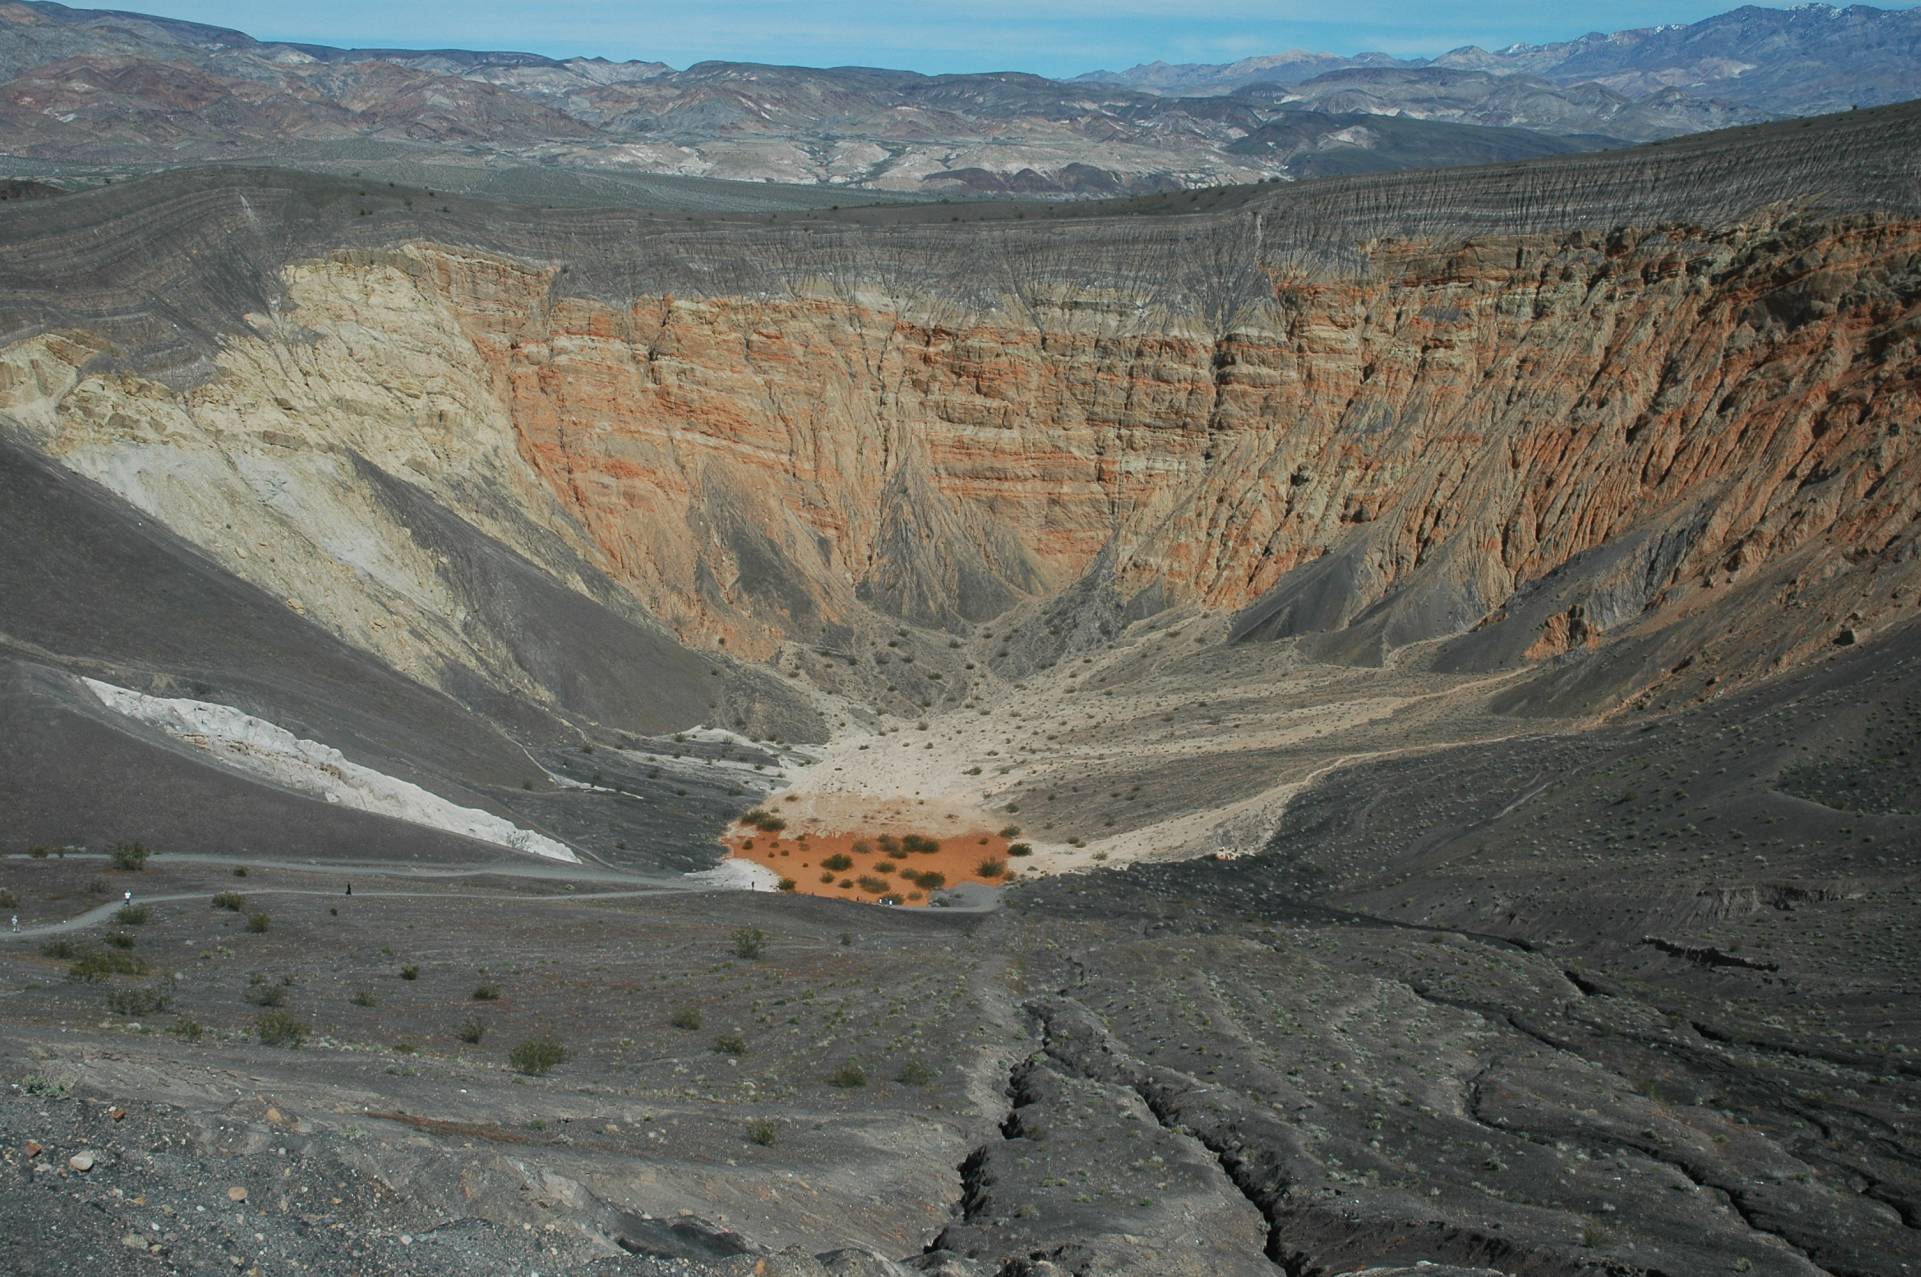 Views from the rim of the Ubehebe Crater, The Historic Stovepipe Well, Death Valley National Park, California